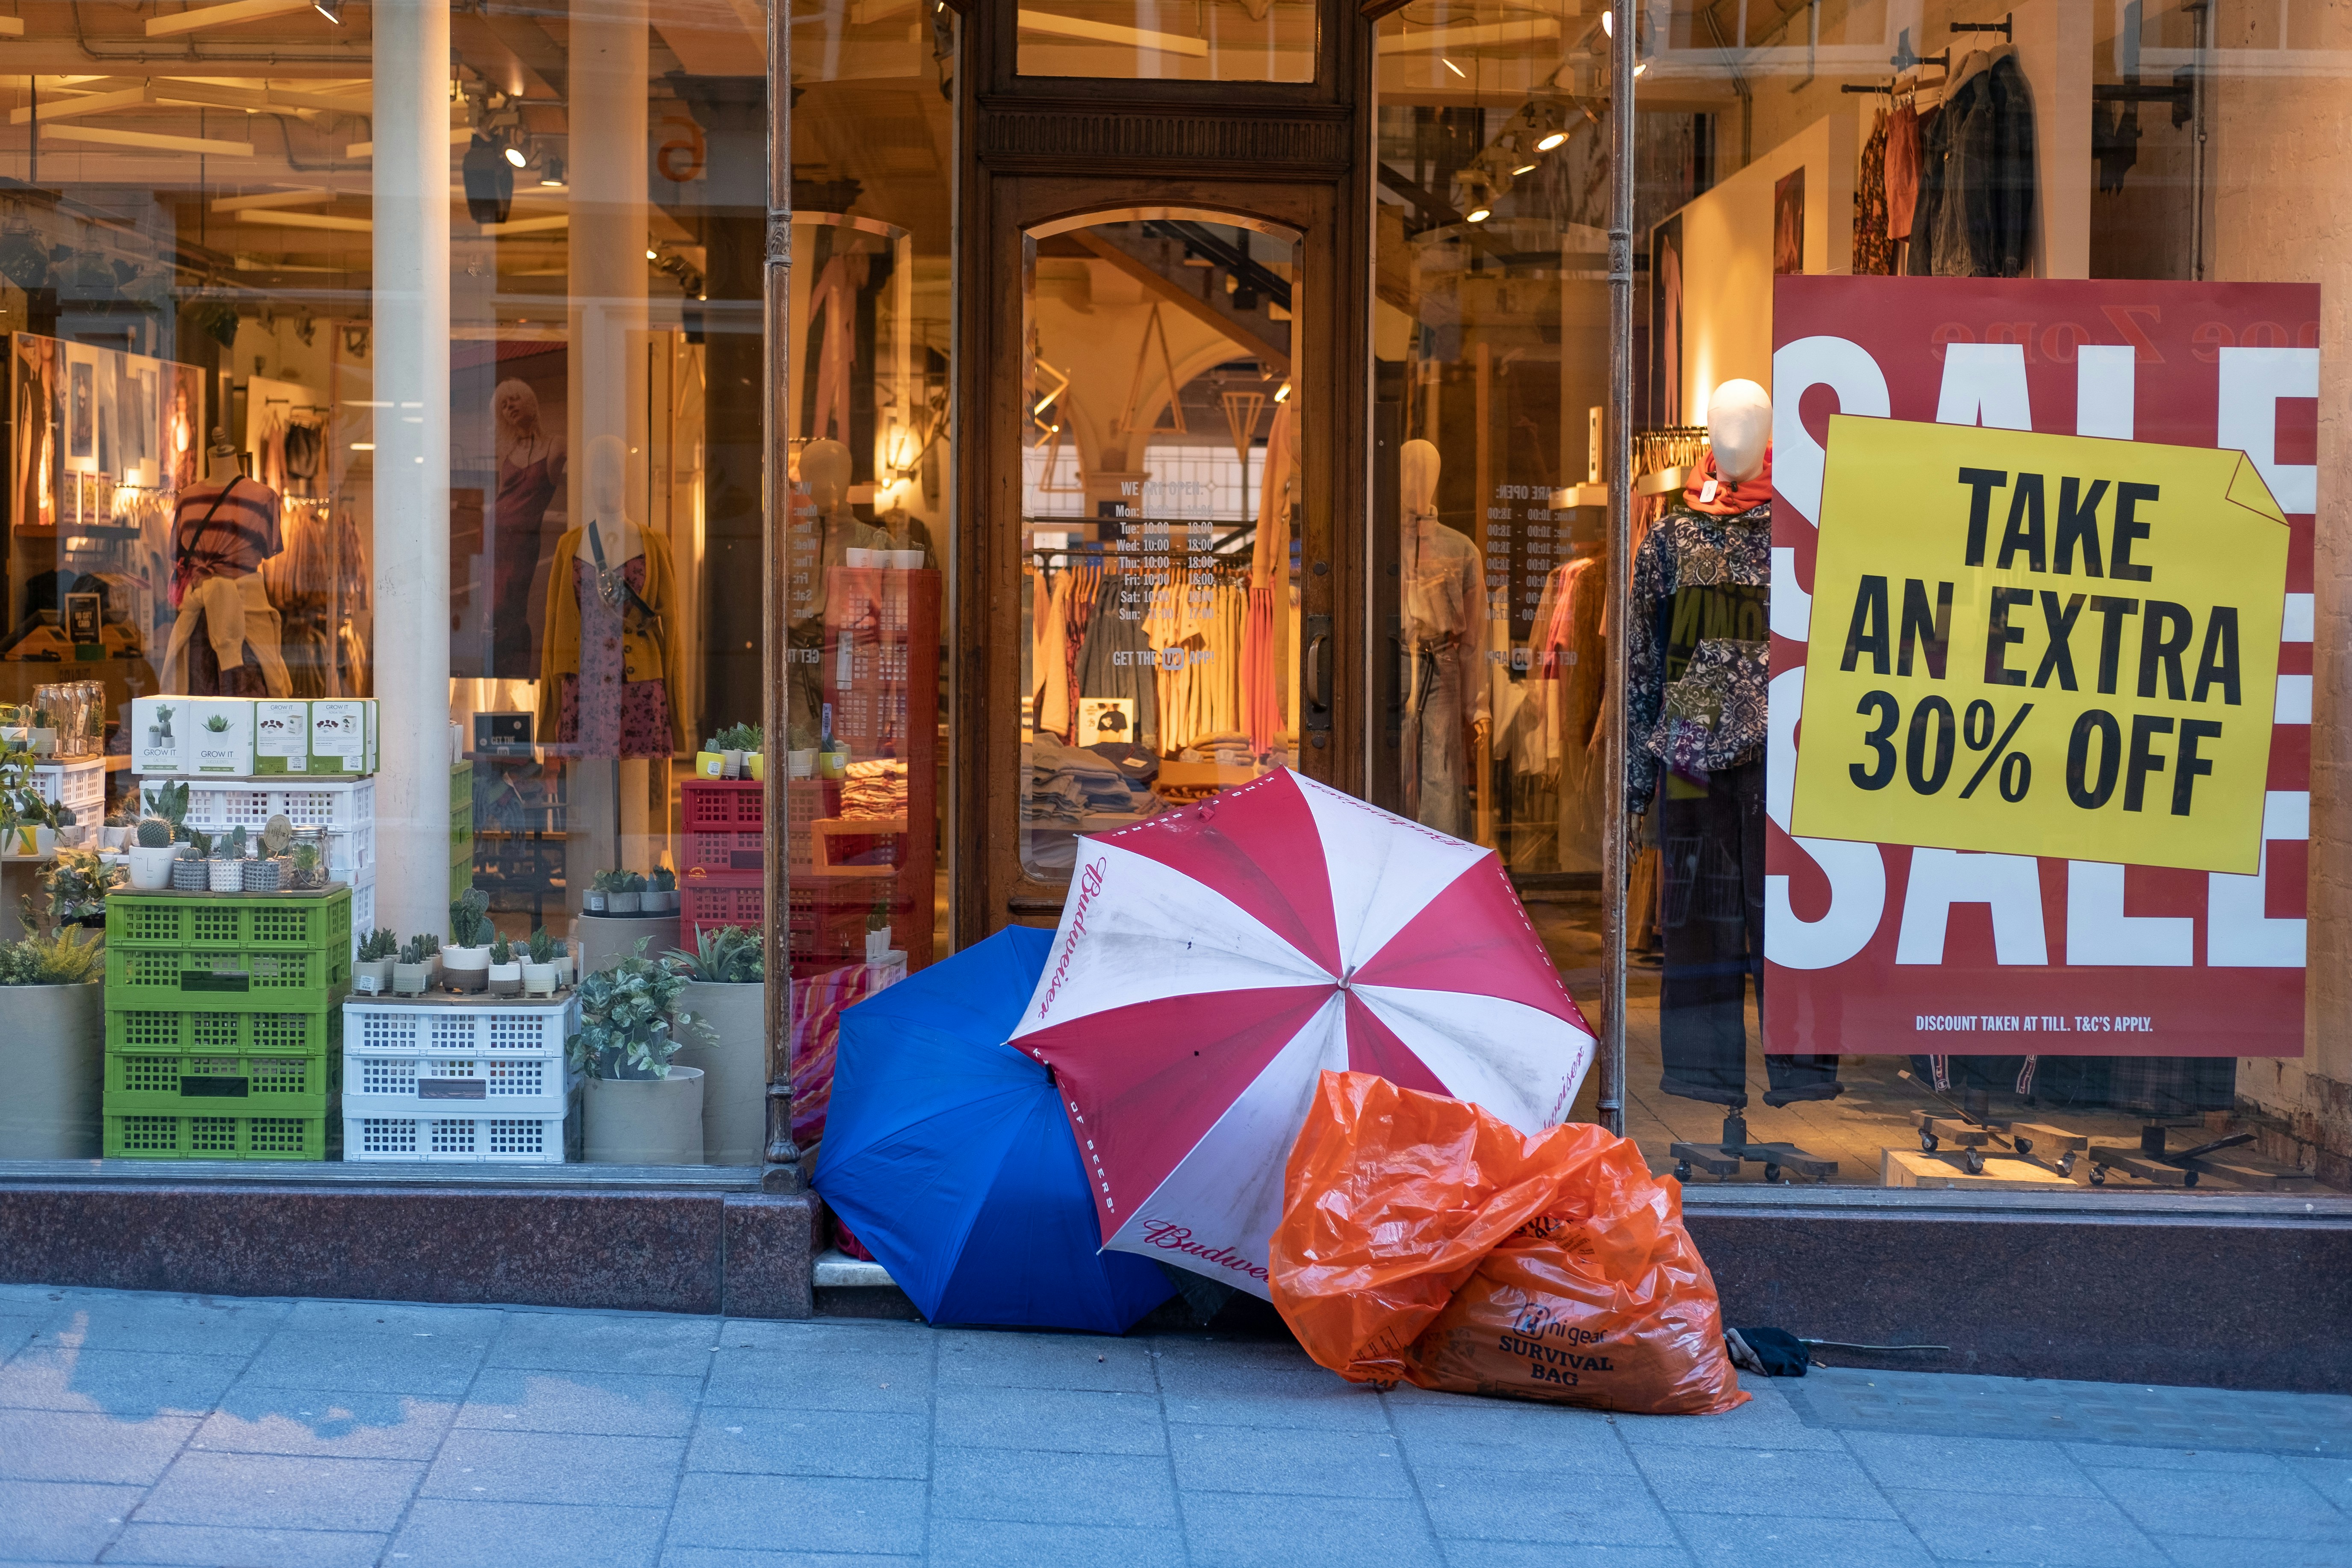 A homeless man takes shelter under opened umbrellas in the front door of a retail shop, while the shop next to him offers significant sales discounts. A juxtaposition - excess and having nothing. The lighting in the shot (the warm hues of the inside of the shop) compound the feeling of coldness on the outside.